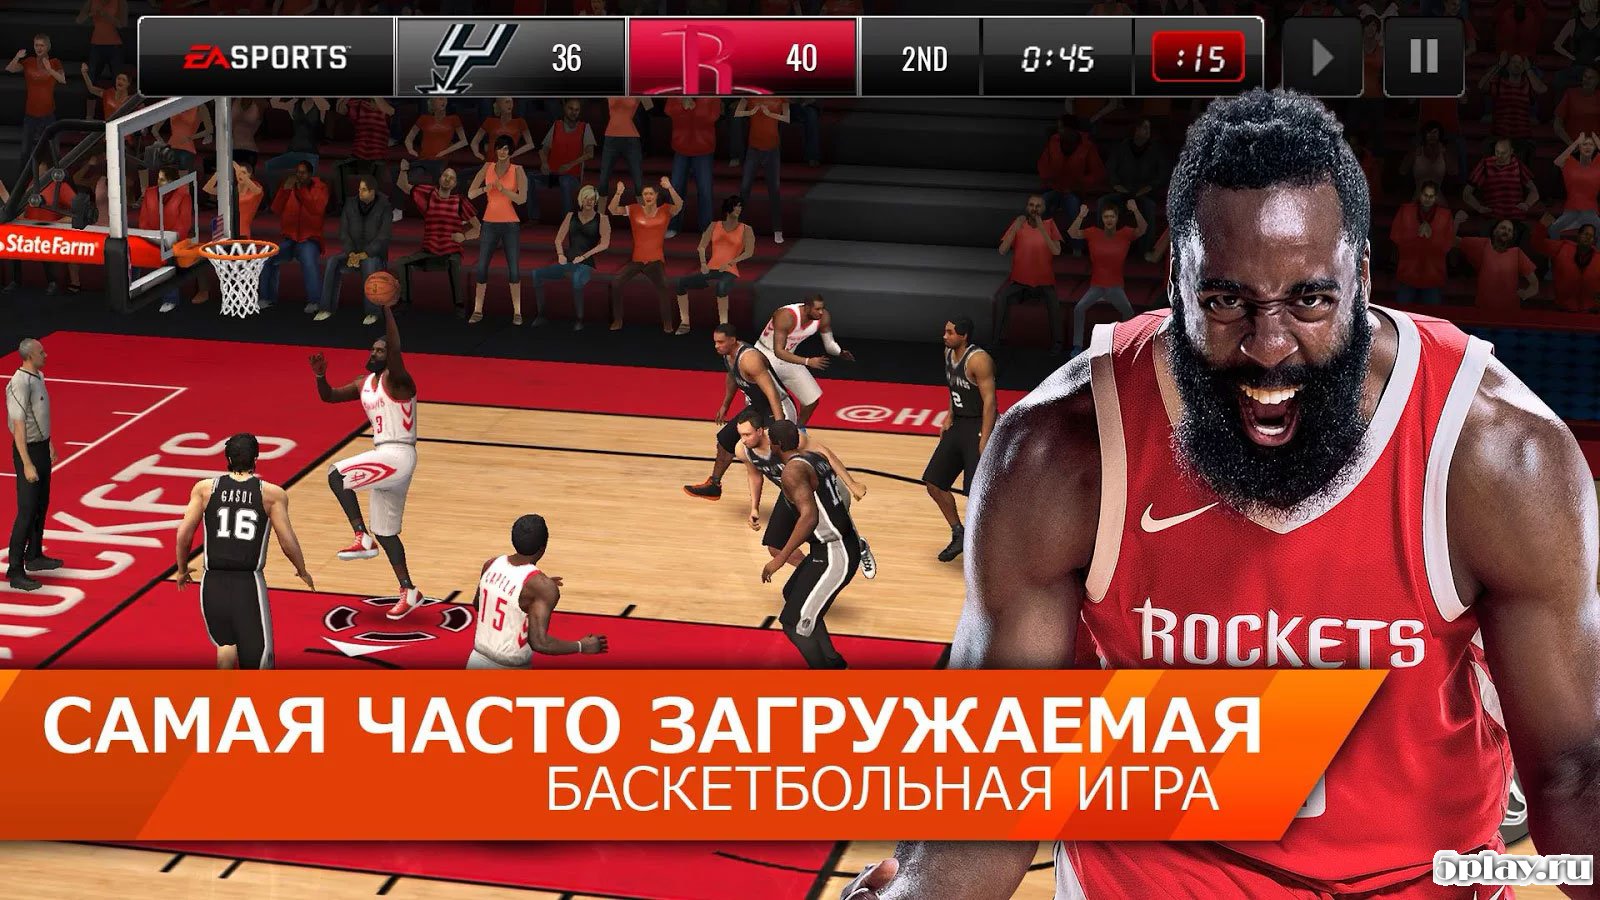 nba basketball free download for android